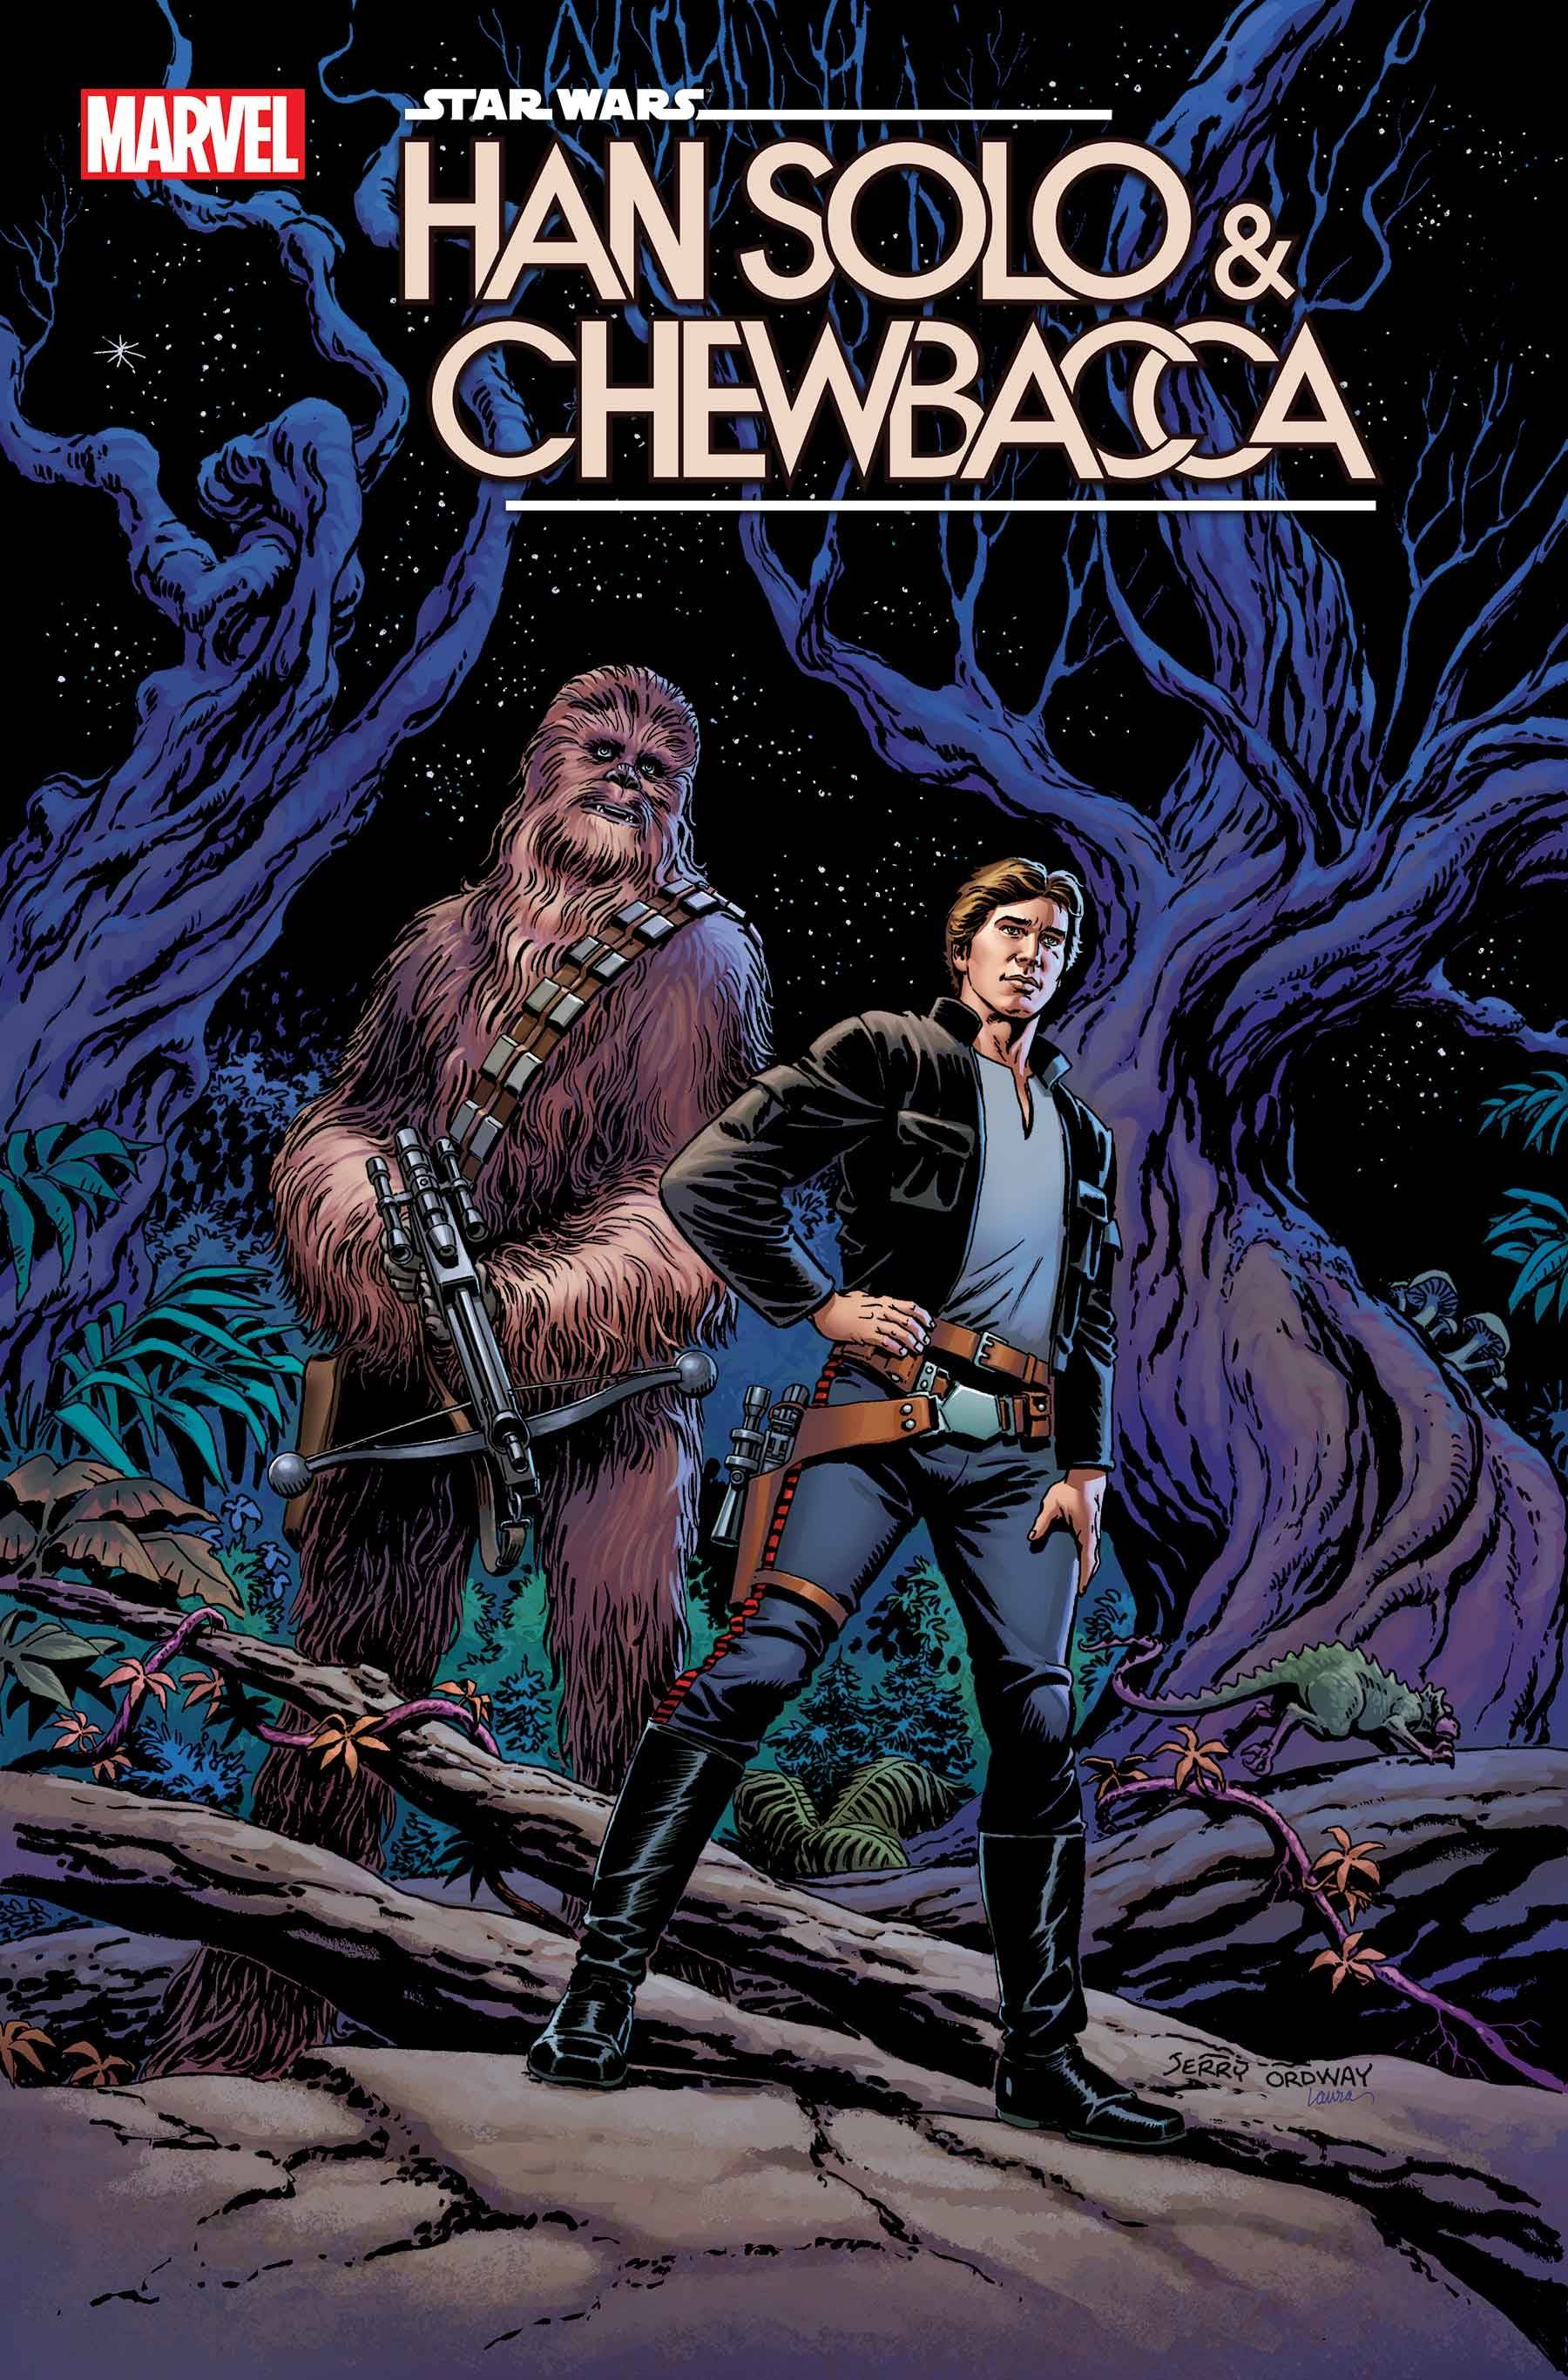 STAR WARS HAN SOLO CHEWBACCA #8 ORDWAY VAR